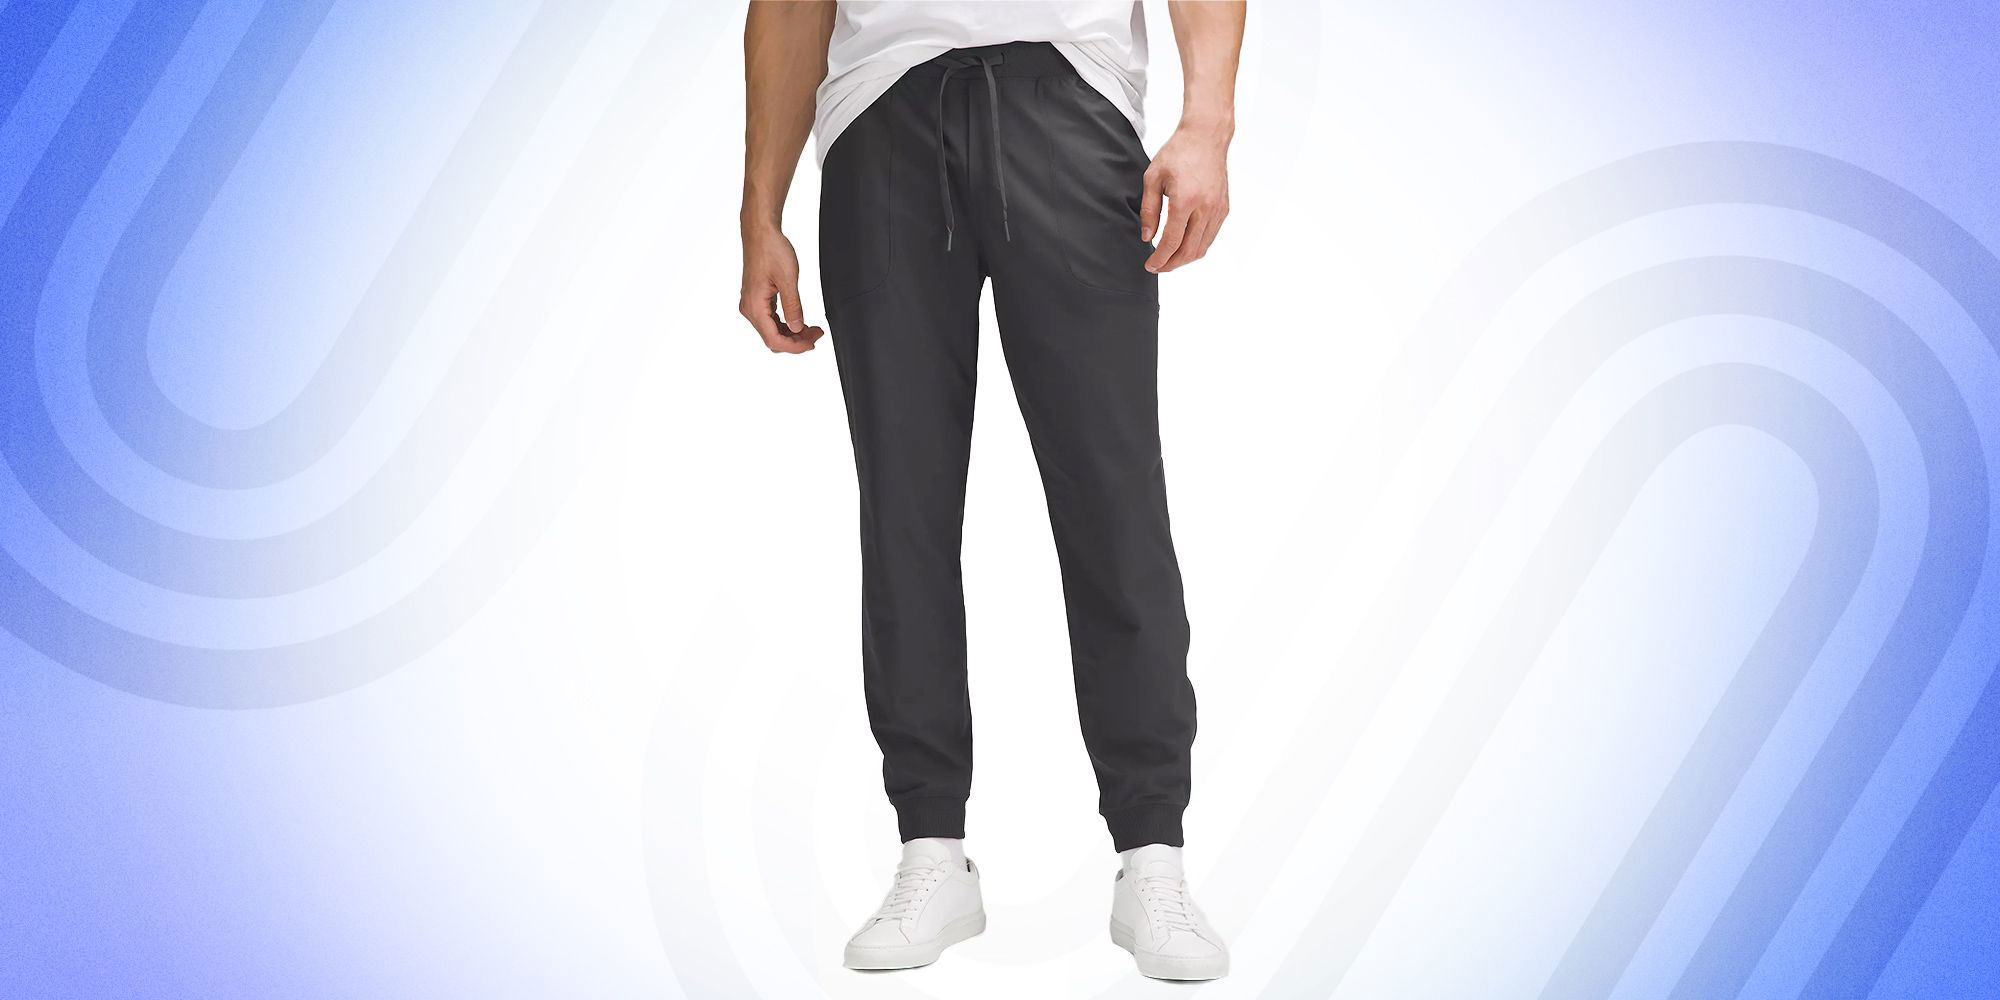 These Lululemon Pants for Men Fit as Well at the Gym as They Do at the ...